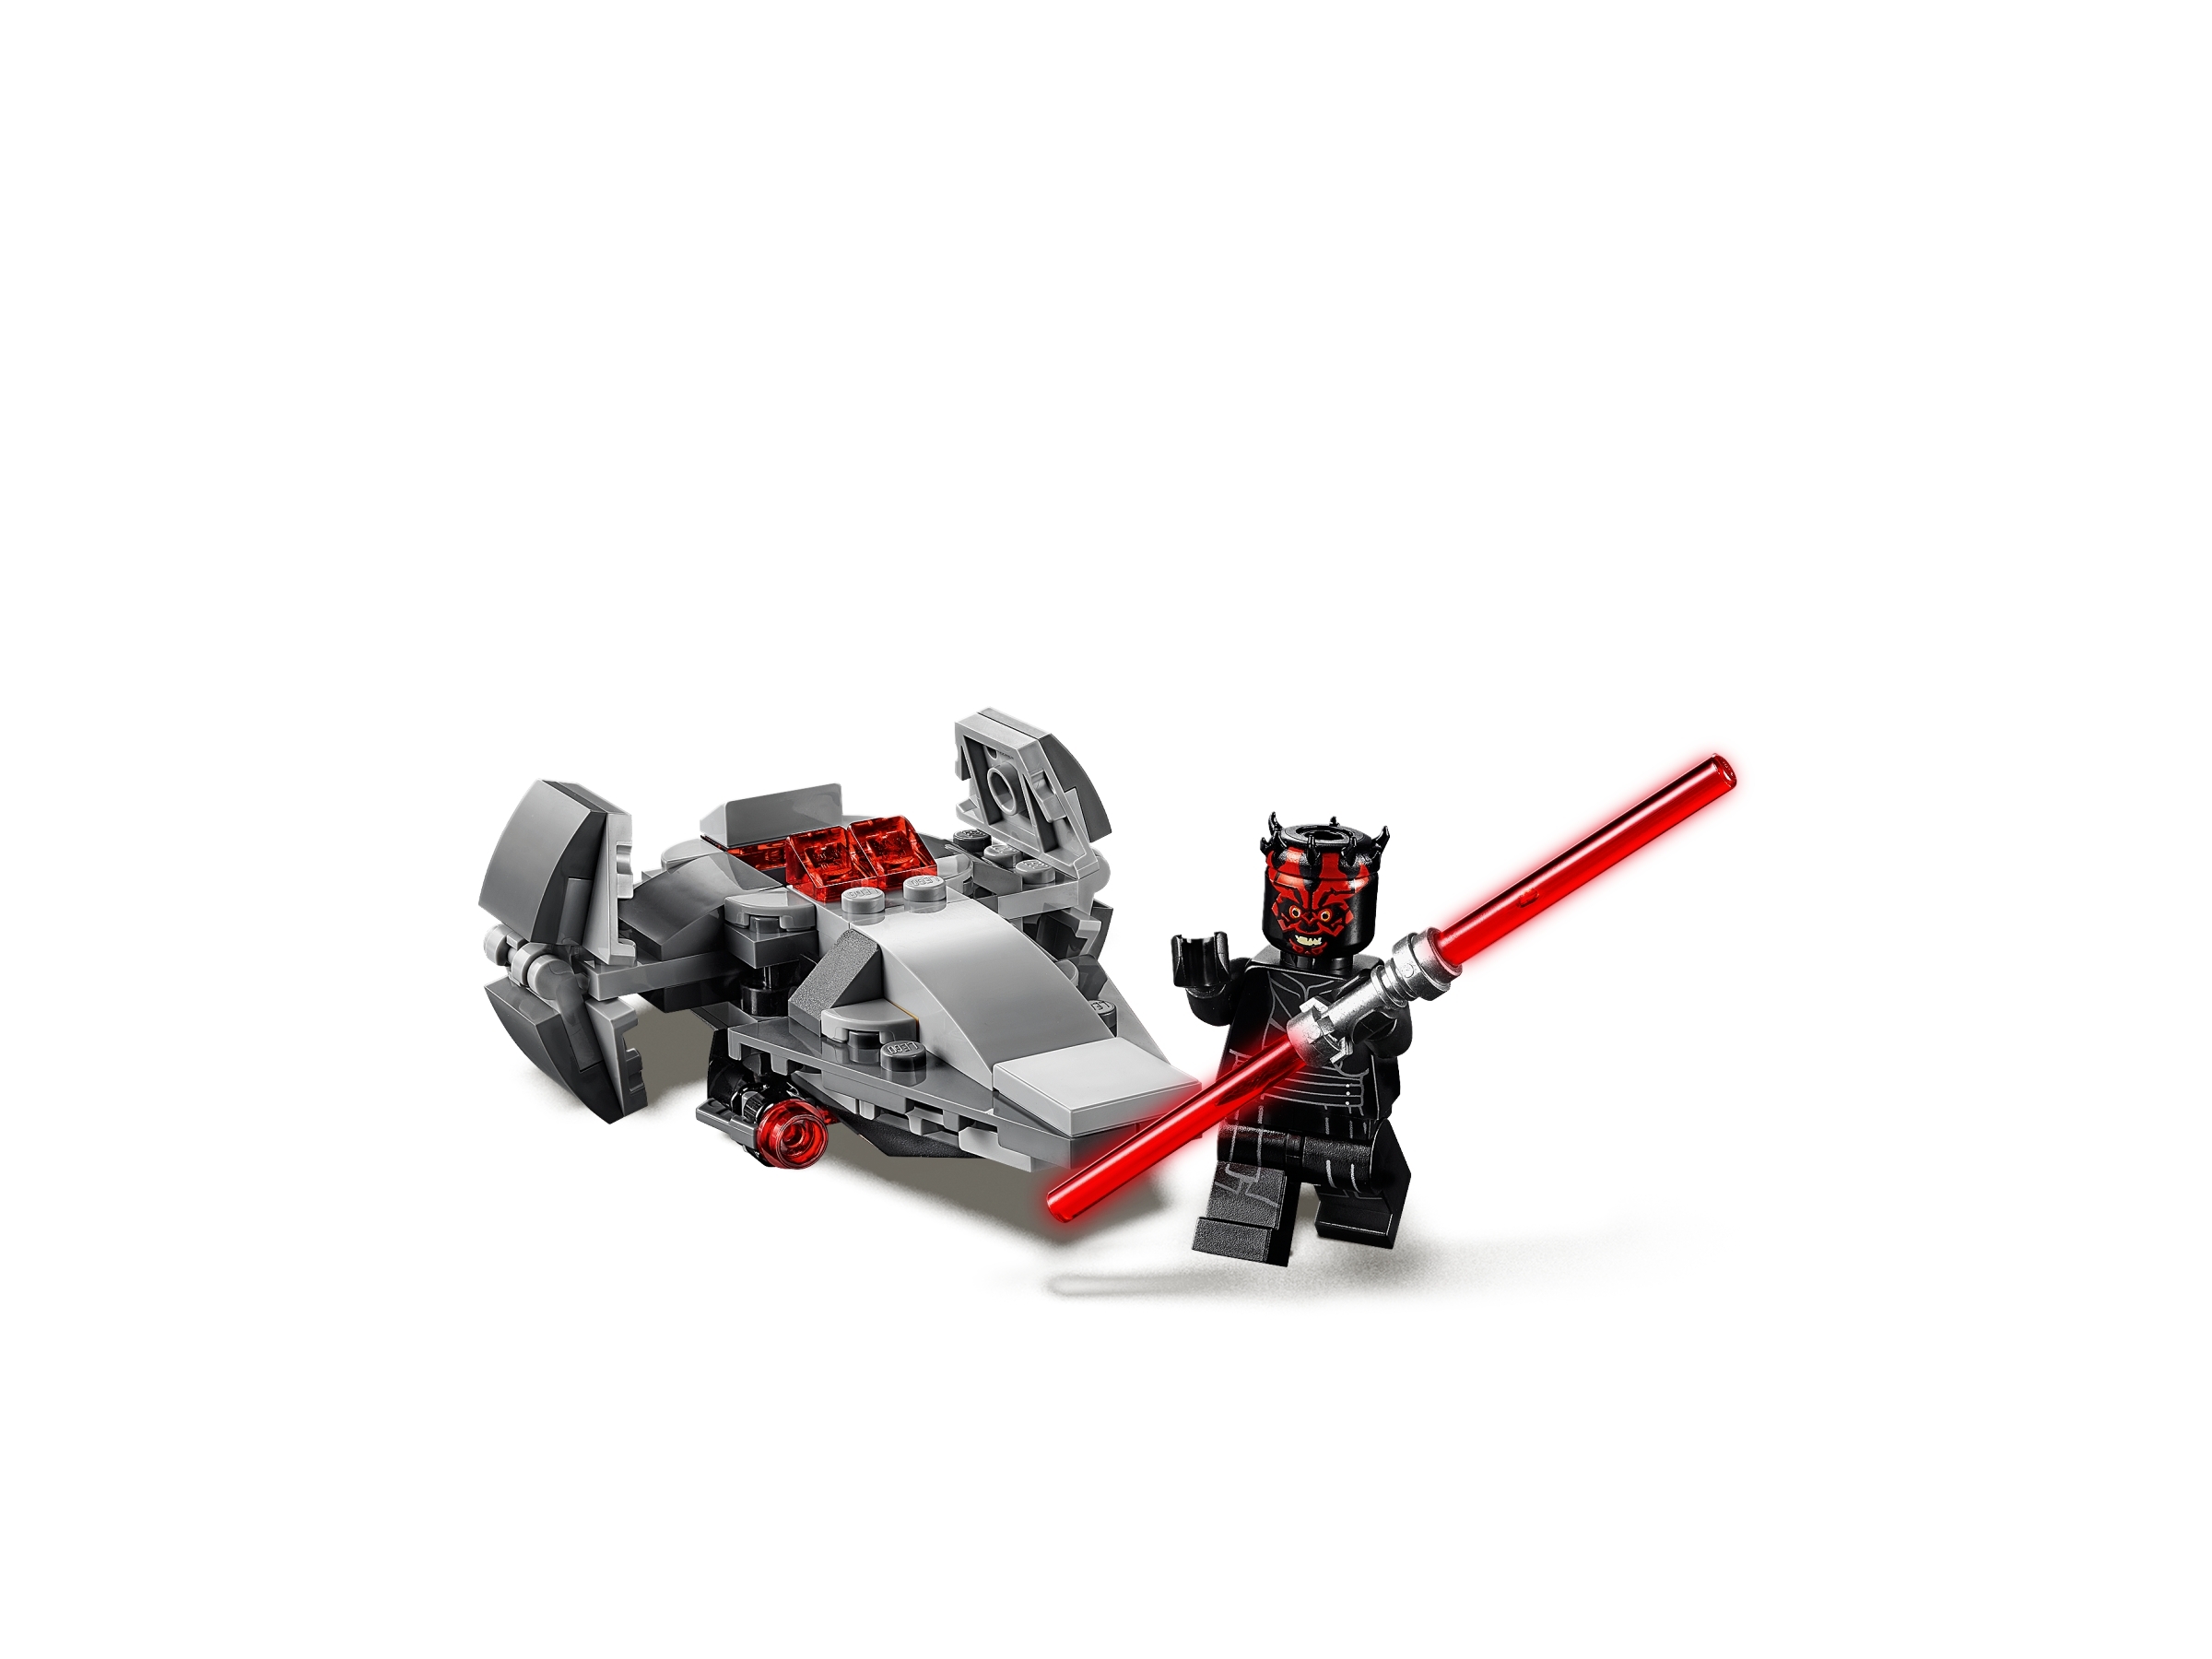 LEGO STAR WARS MICRO FIGHTERS w/ Sith Infiltrator 75224 SERIES 6 NEW  Z18 